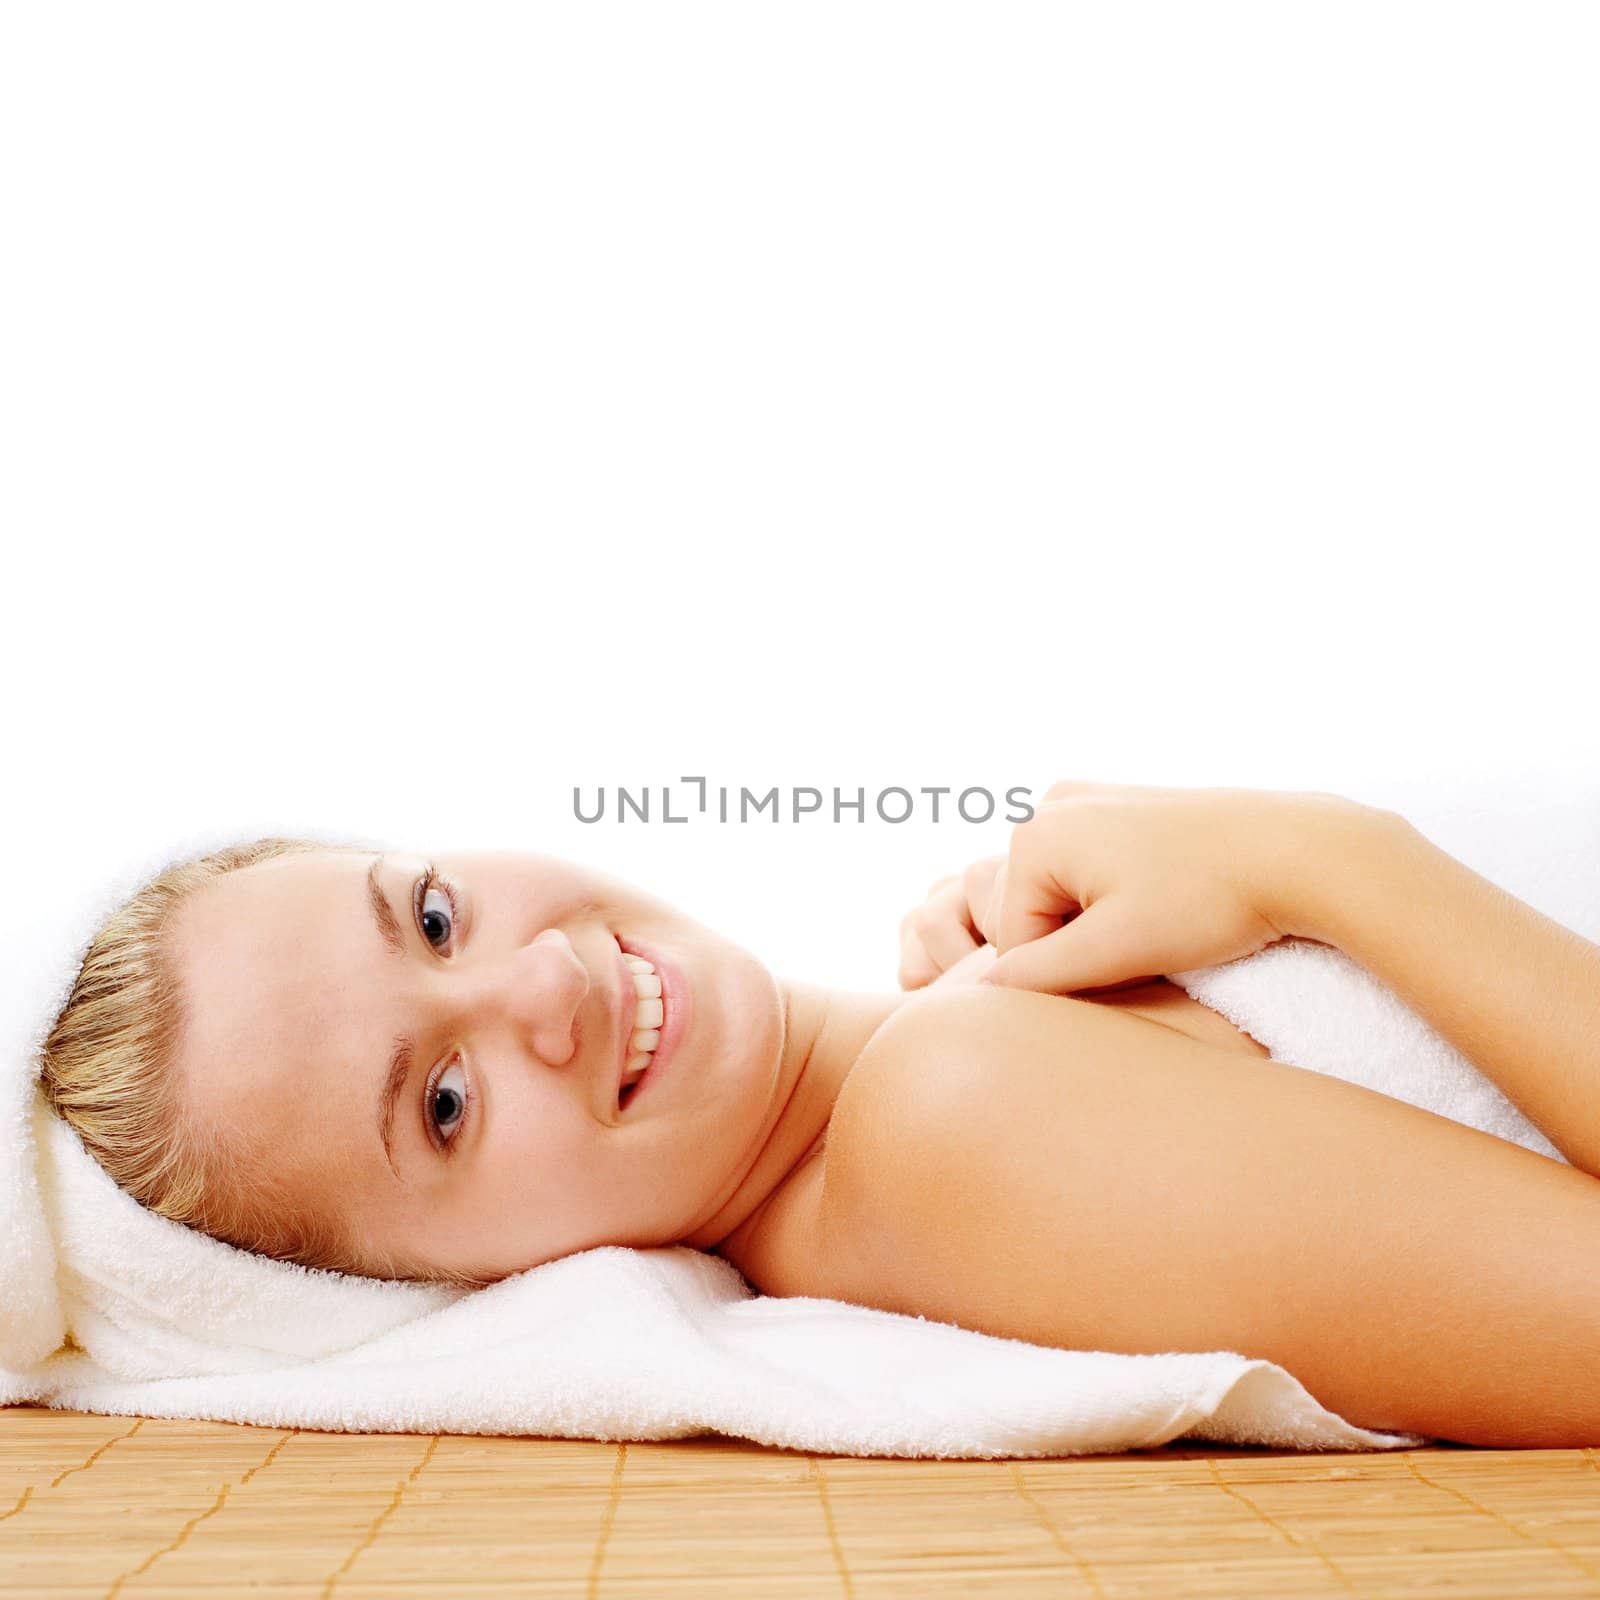 Beautiful Young Spa Woman On White by cardmaverick